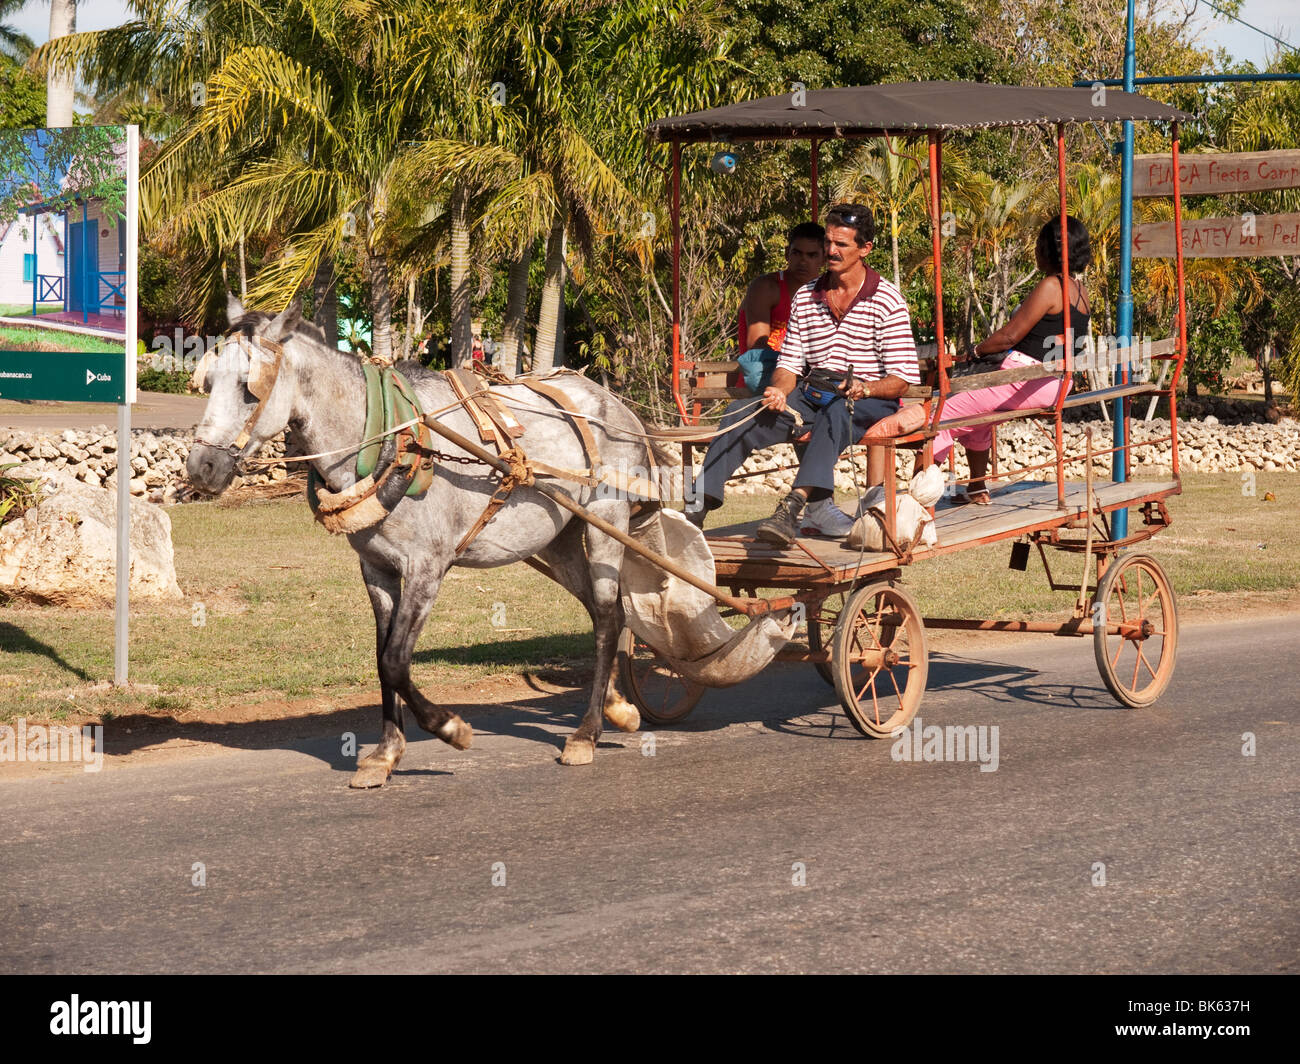 Family Horse and cart or carriage in central Cuba Stock Photo